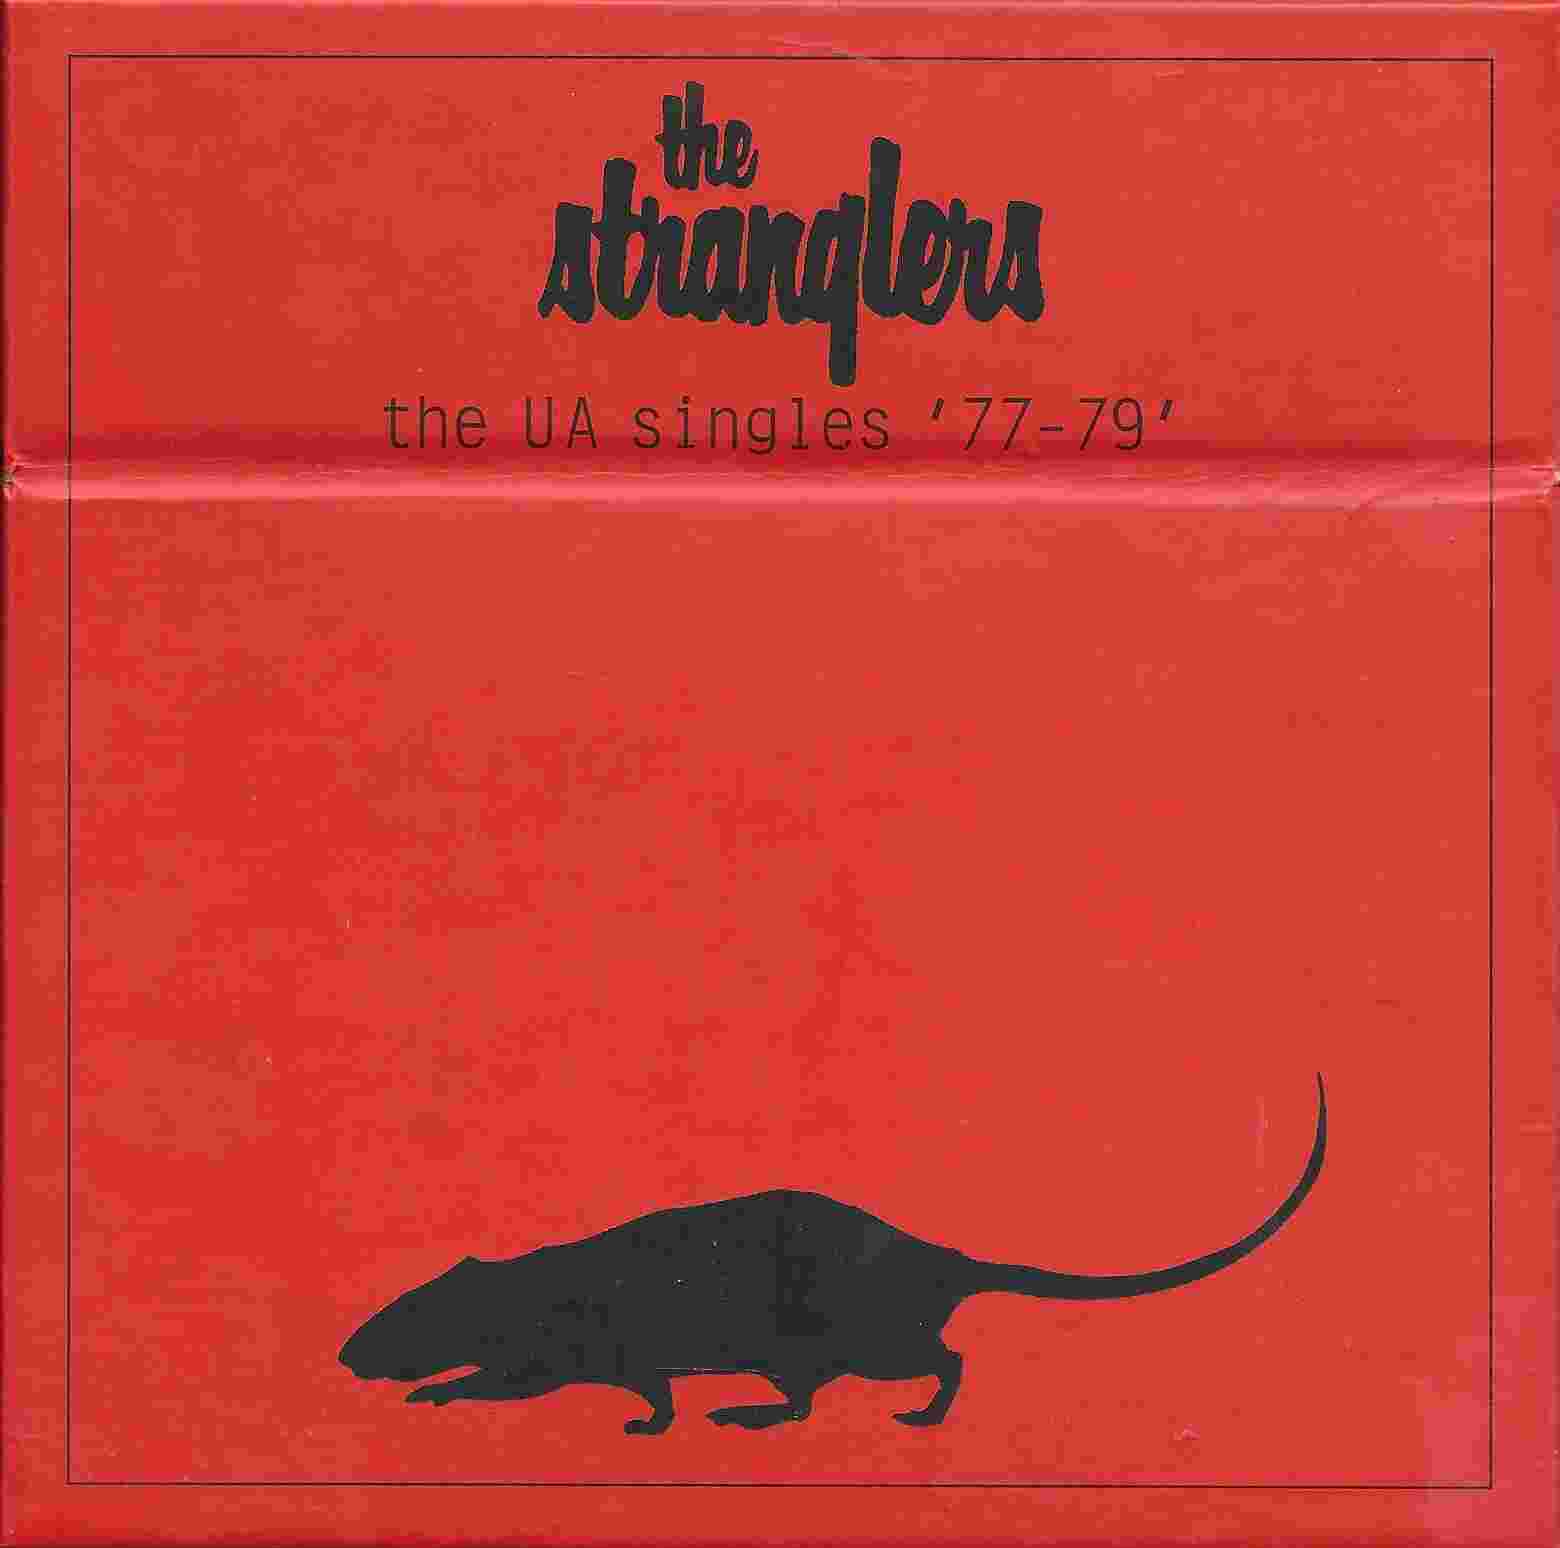 Picture of 889172 2 The UA singles 1977-1979 by artist The Stranglers 